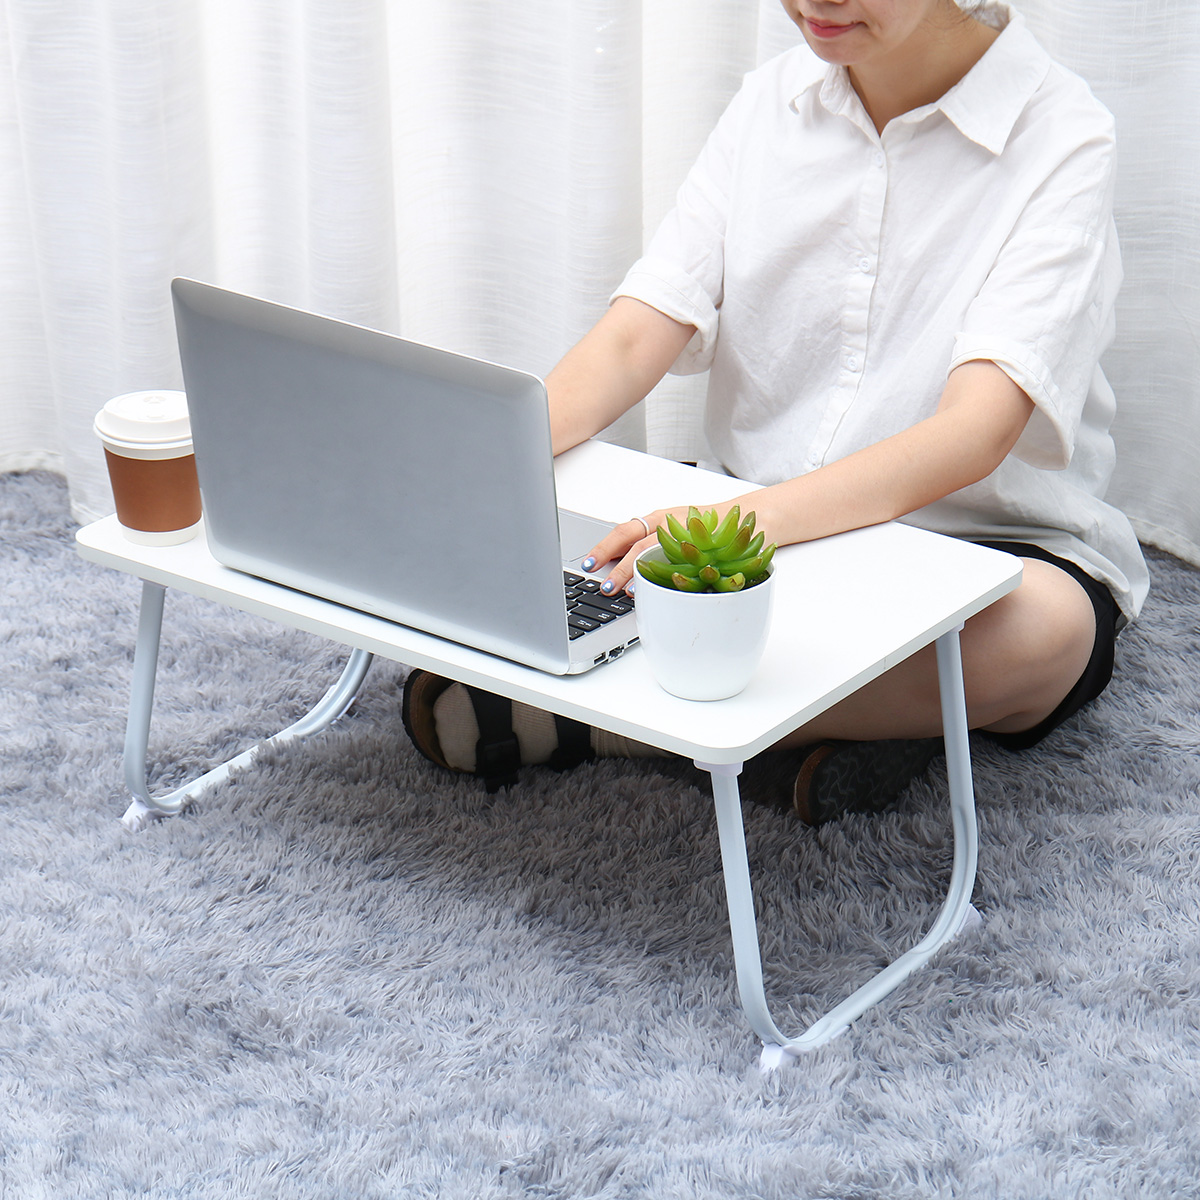 Foldable-Laptop-Desk-Portable-Notebook-Comuter-Table-Study-Table-Bed-Tray-Home-Office-Furniture-1755385-10